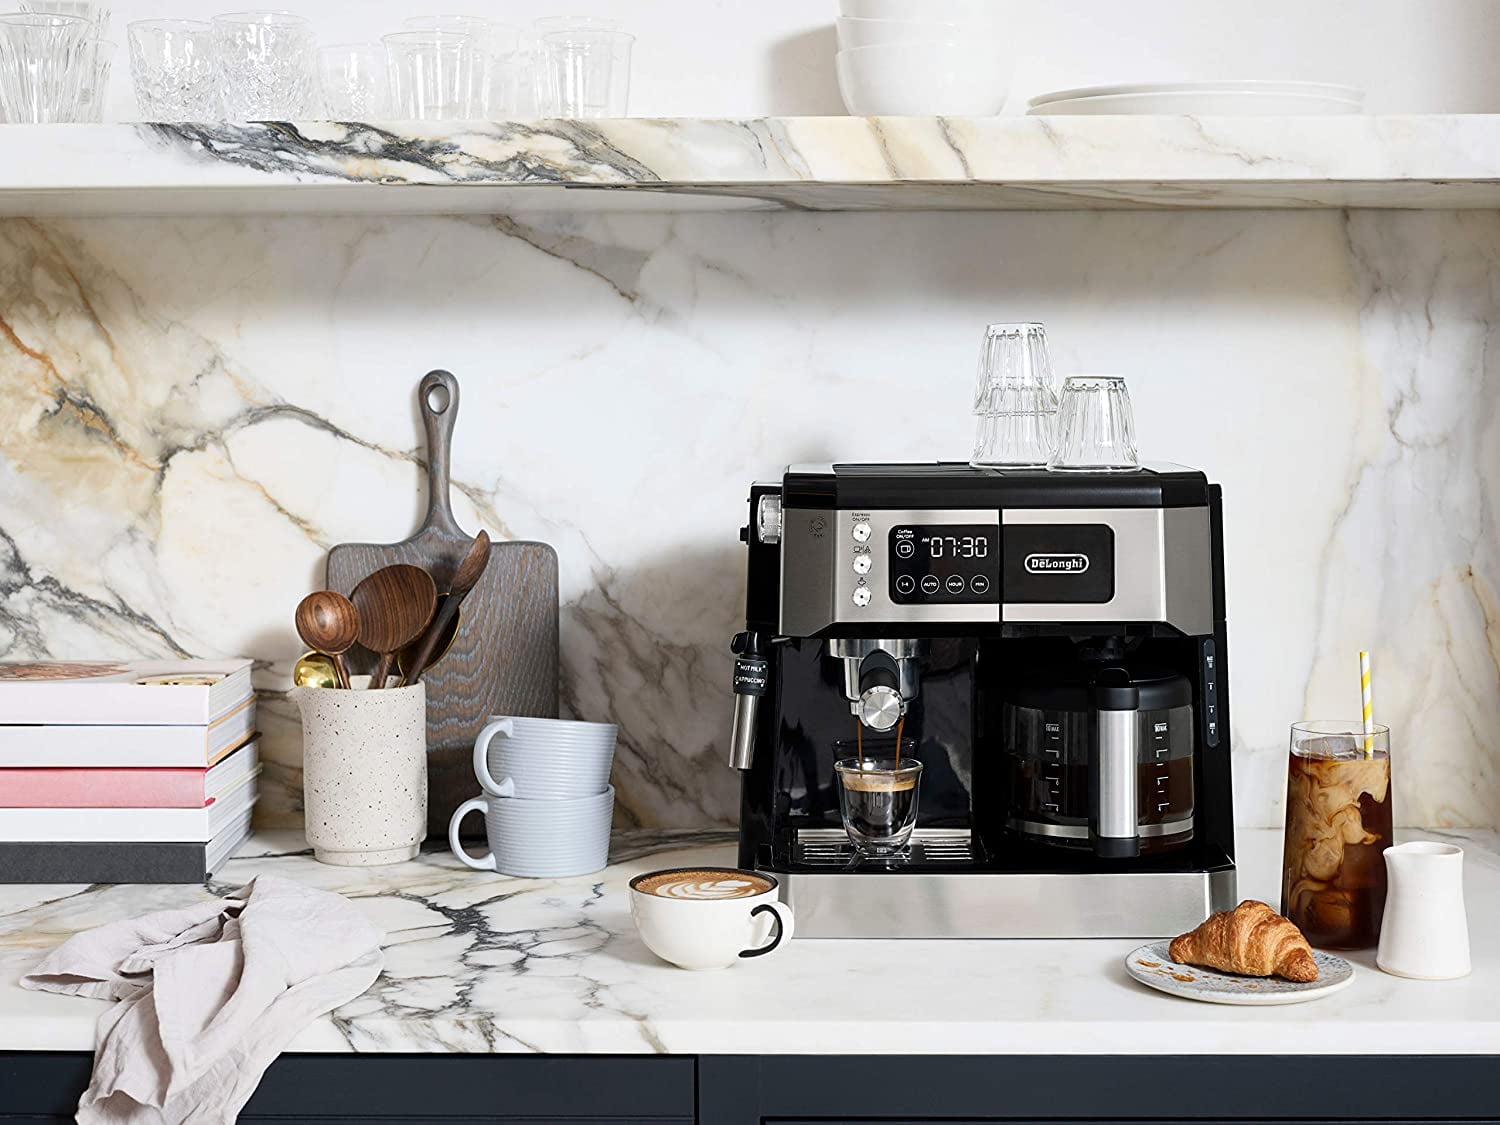 De'Longhi All-in-One Combination Coffee and Espresso Machine - Black and  Stainless Steel - Yahoo Shopping